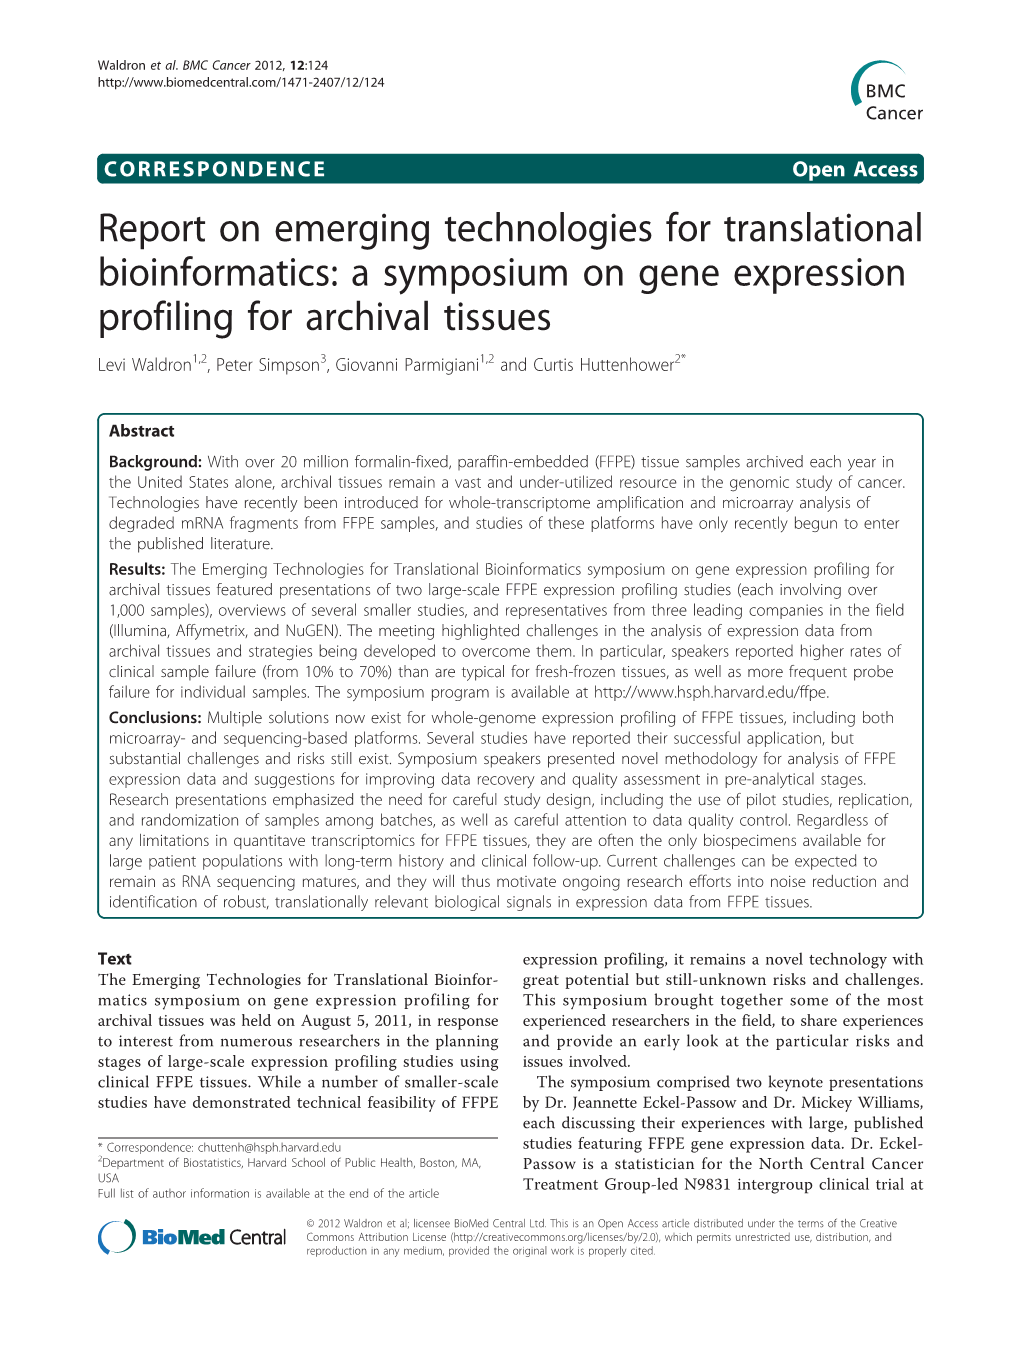 Report on Emerging Technologies for Translational Bioinformatics: a Symposium on Gene Expression Profiling for Archival Tissues